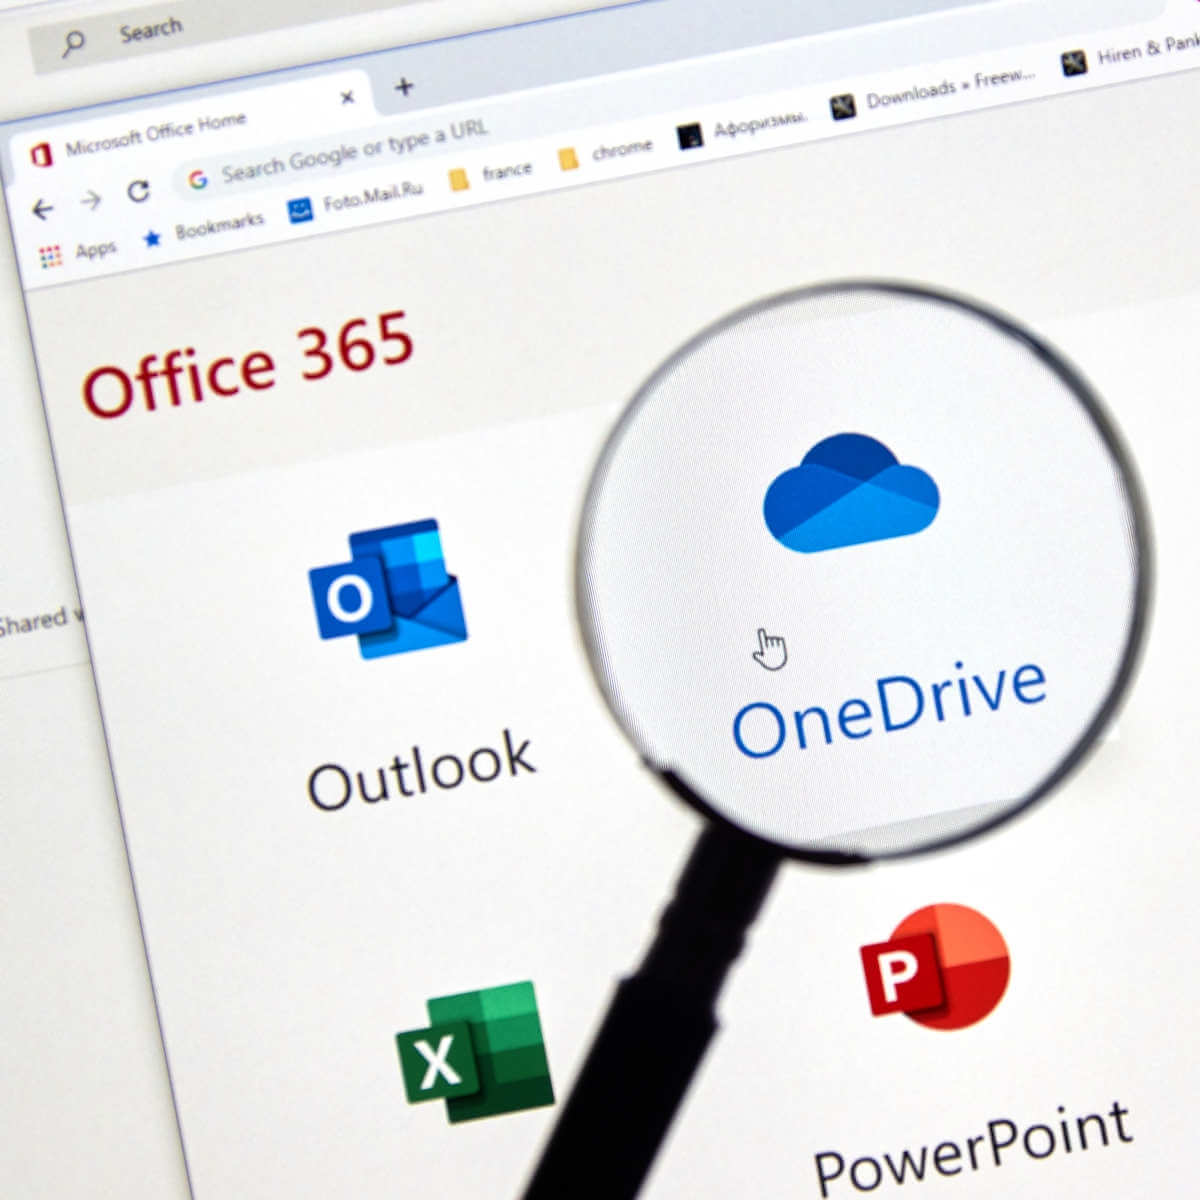 OneDrive storage limit increased